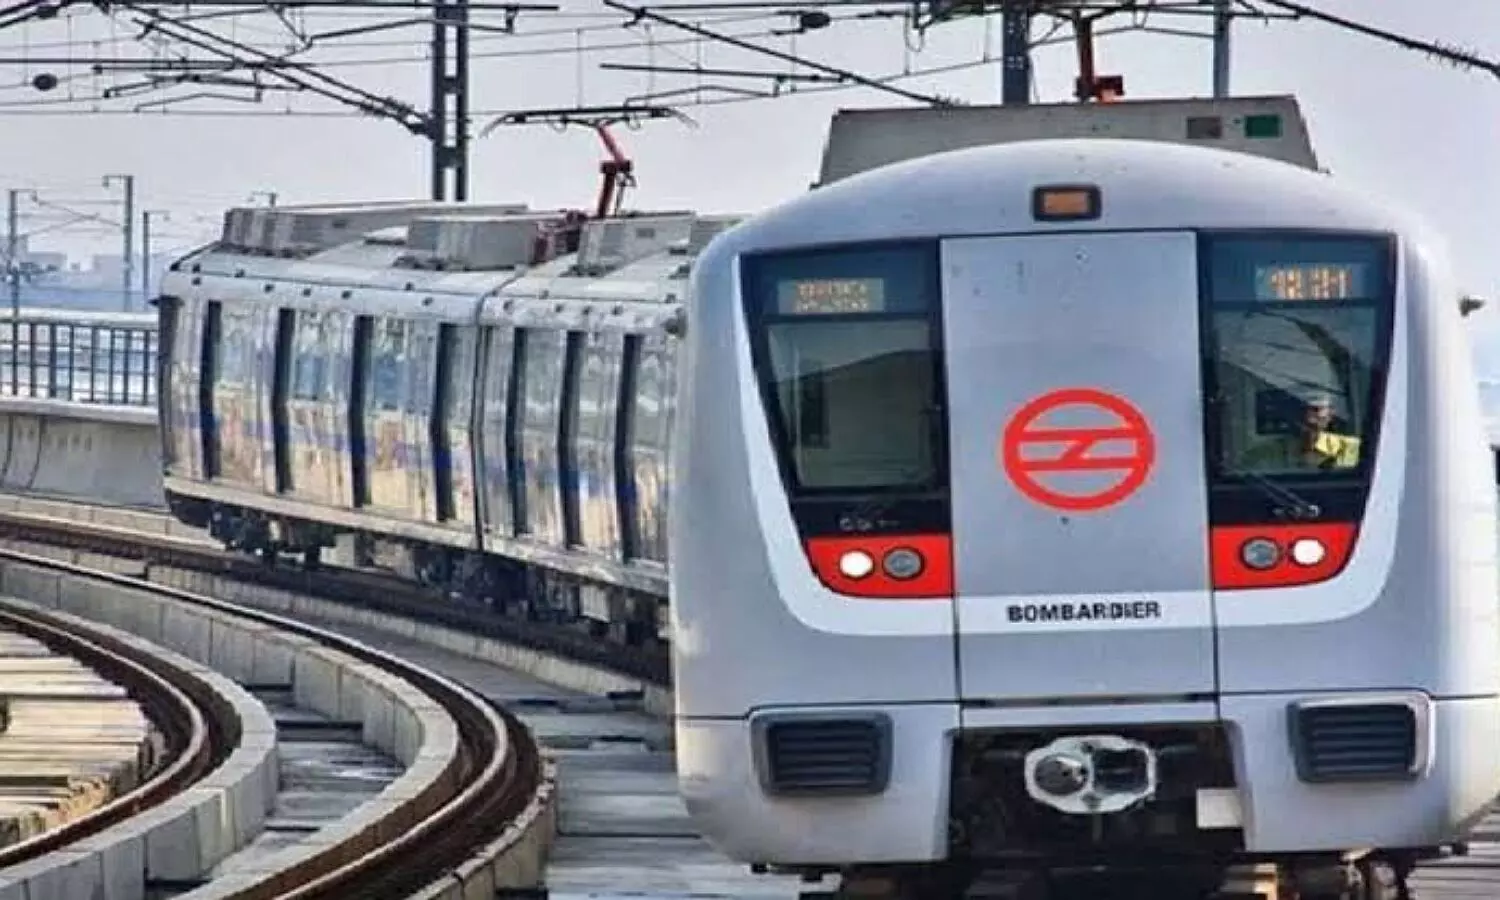 Metro will run with 100% capacity from July 26